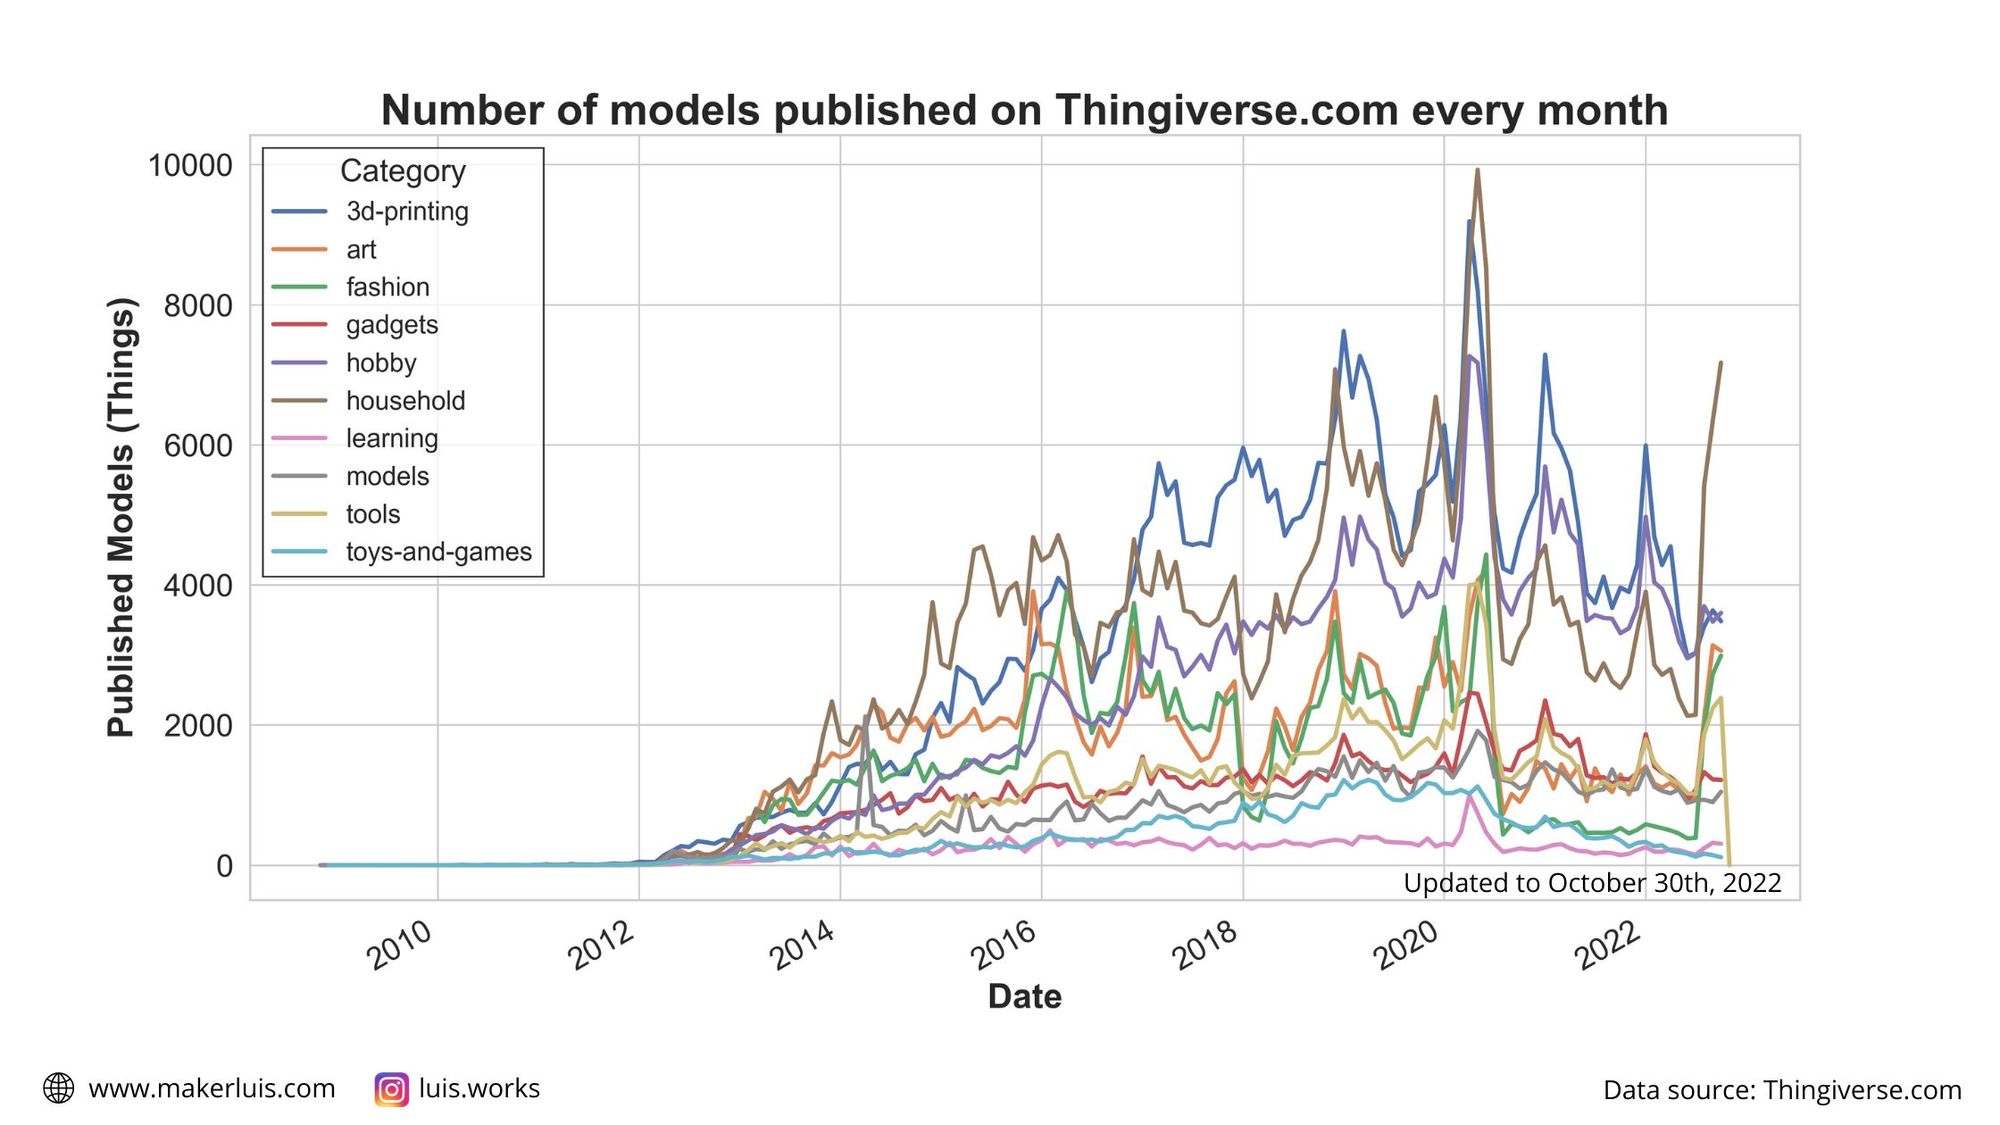 Line plot of the monthly number of published models on Thingiverse over time. The macro categories of objects are represented with different colors. There's a spike around 2020